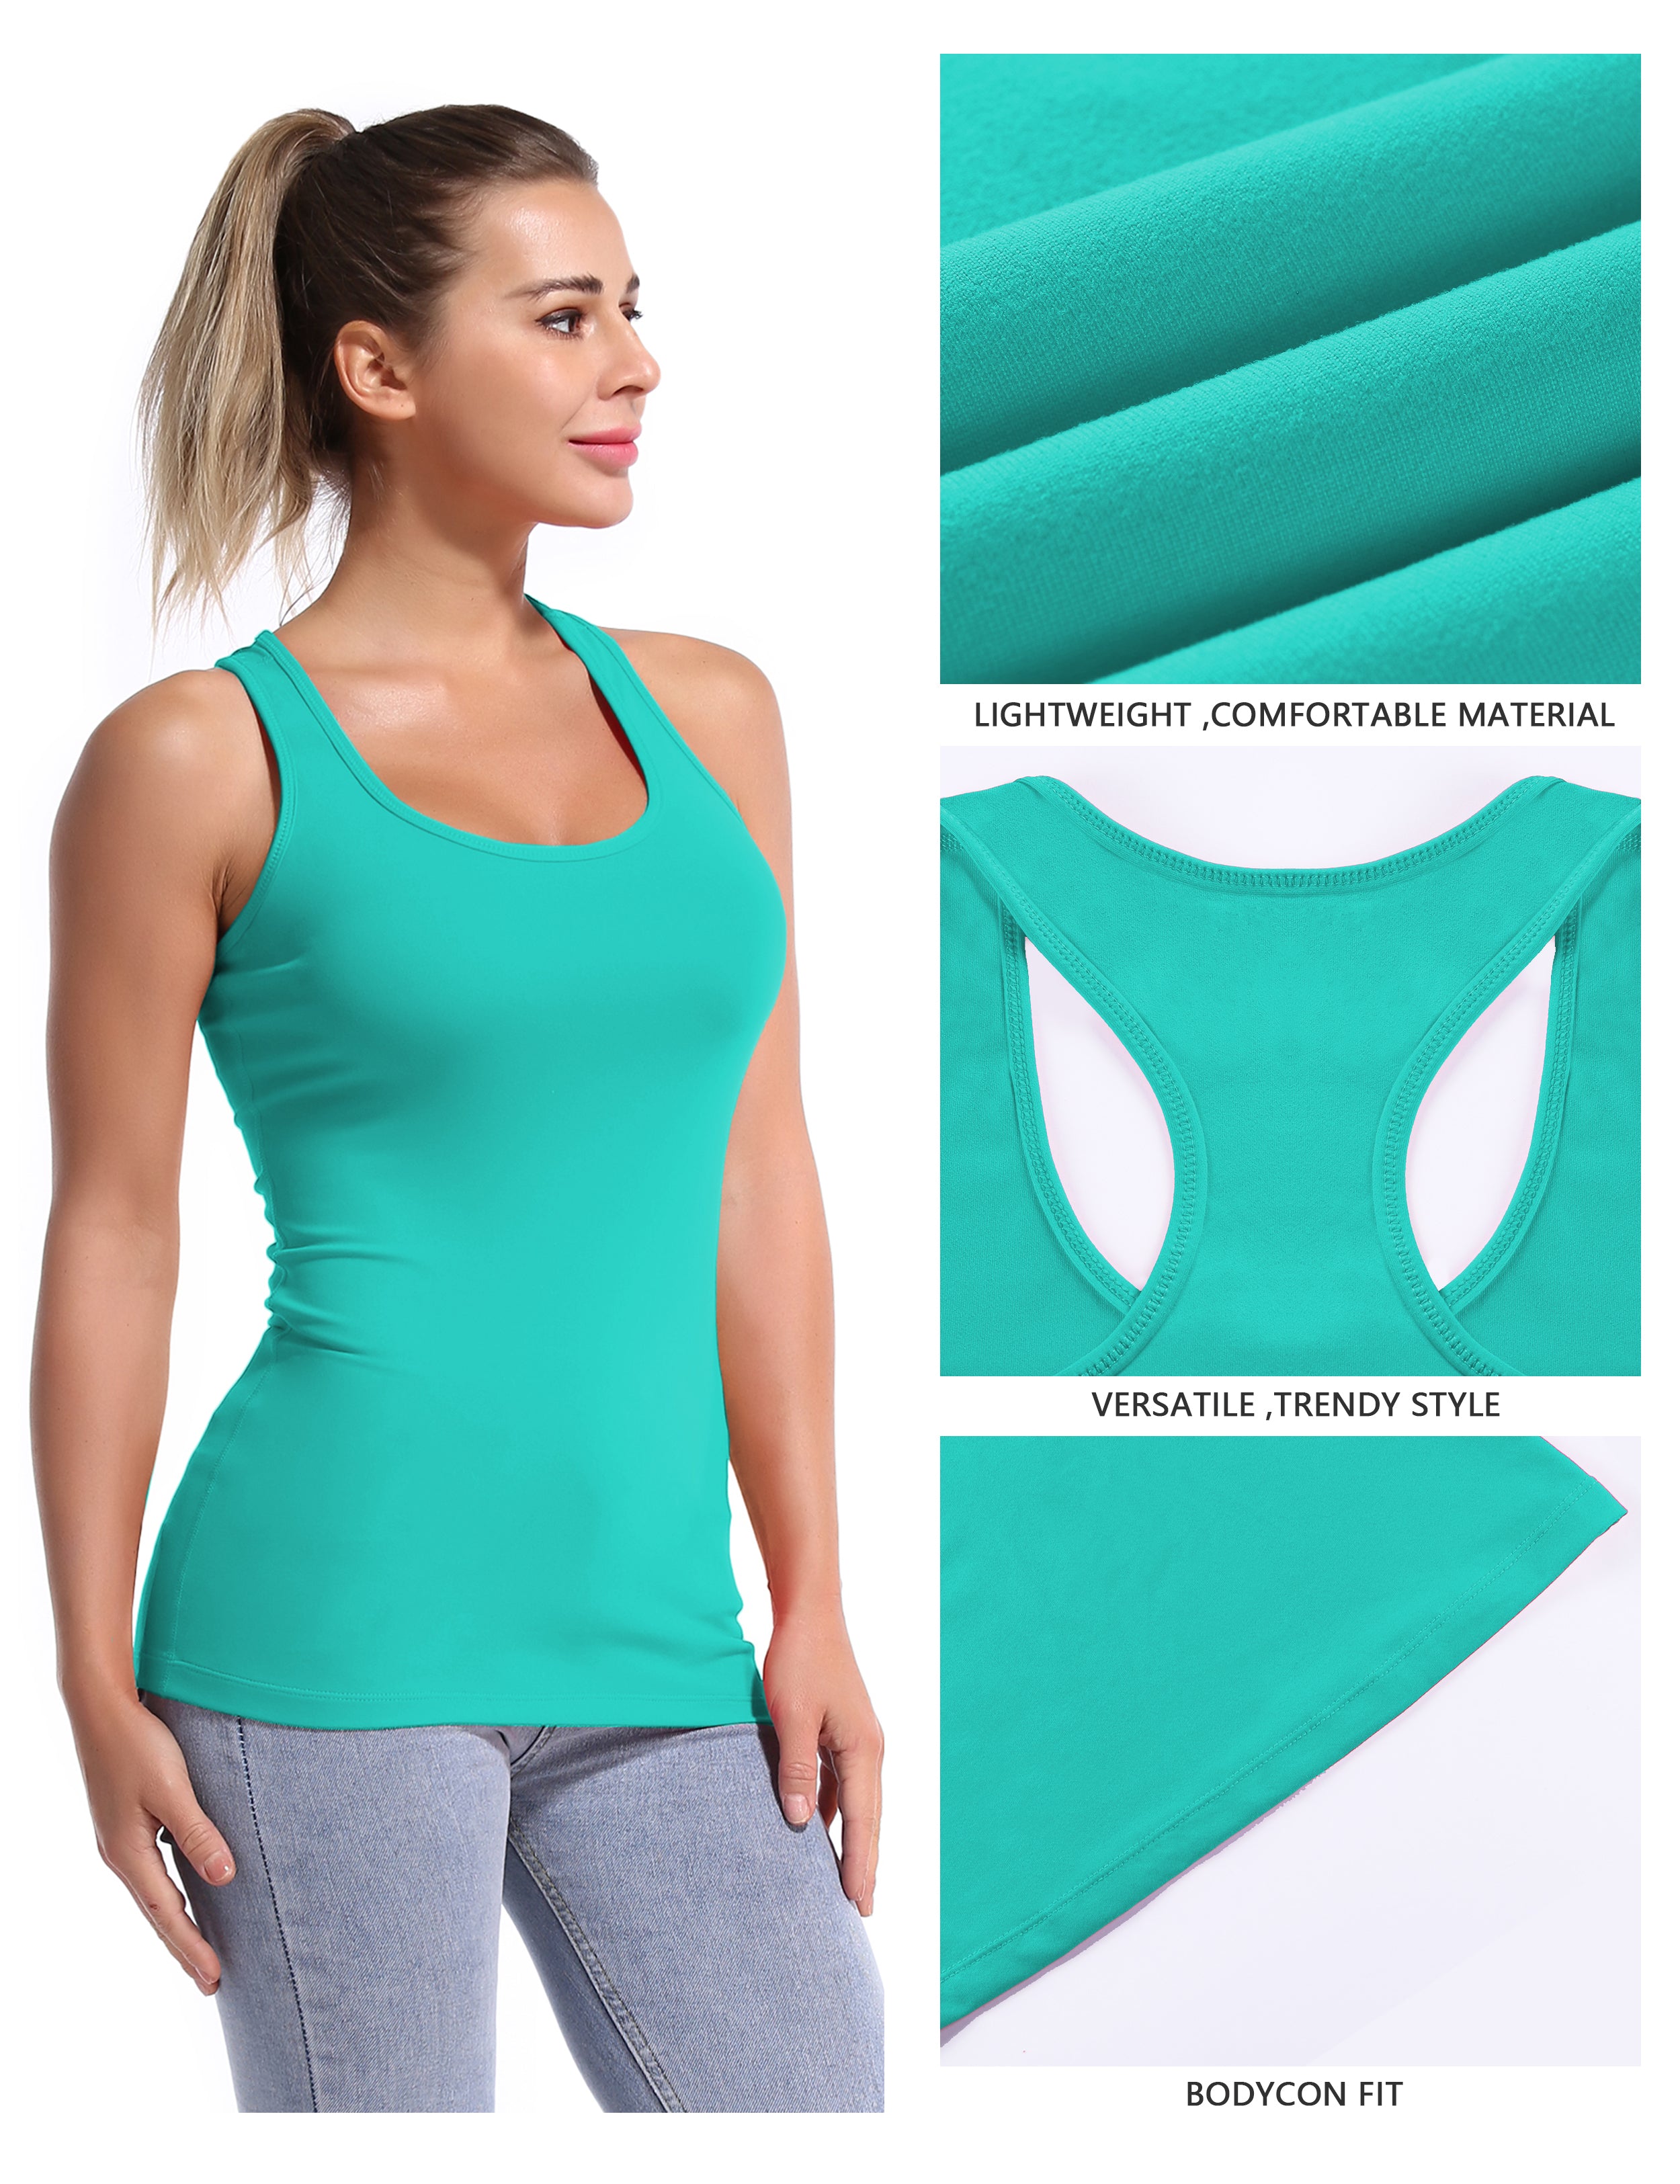 Racerback Athletic Tank Tops cyan 92%Nylon/8%Spandex(Cotton Soft) Designed for Pilates Tight Fit So buttery soft, it feels weightless Sweat-wicking Four-way stretch Breathable Contours your body Sits below the waistband for moderate, everyday coverage